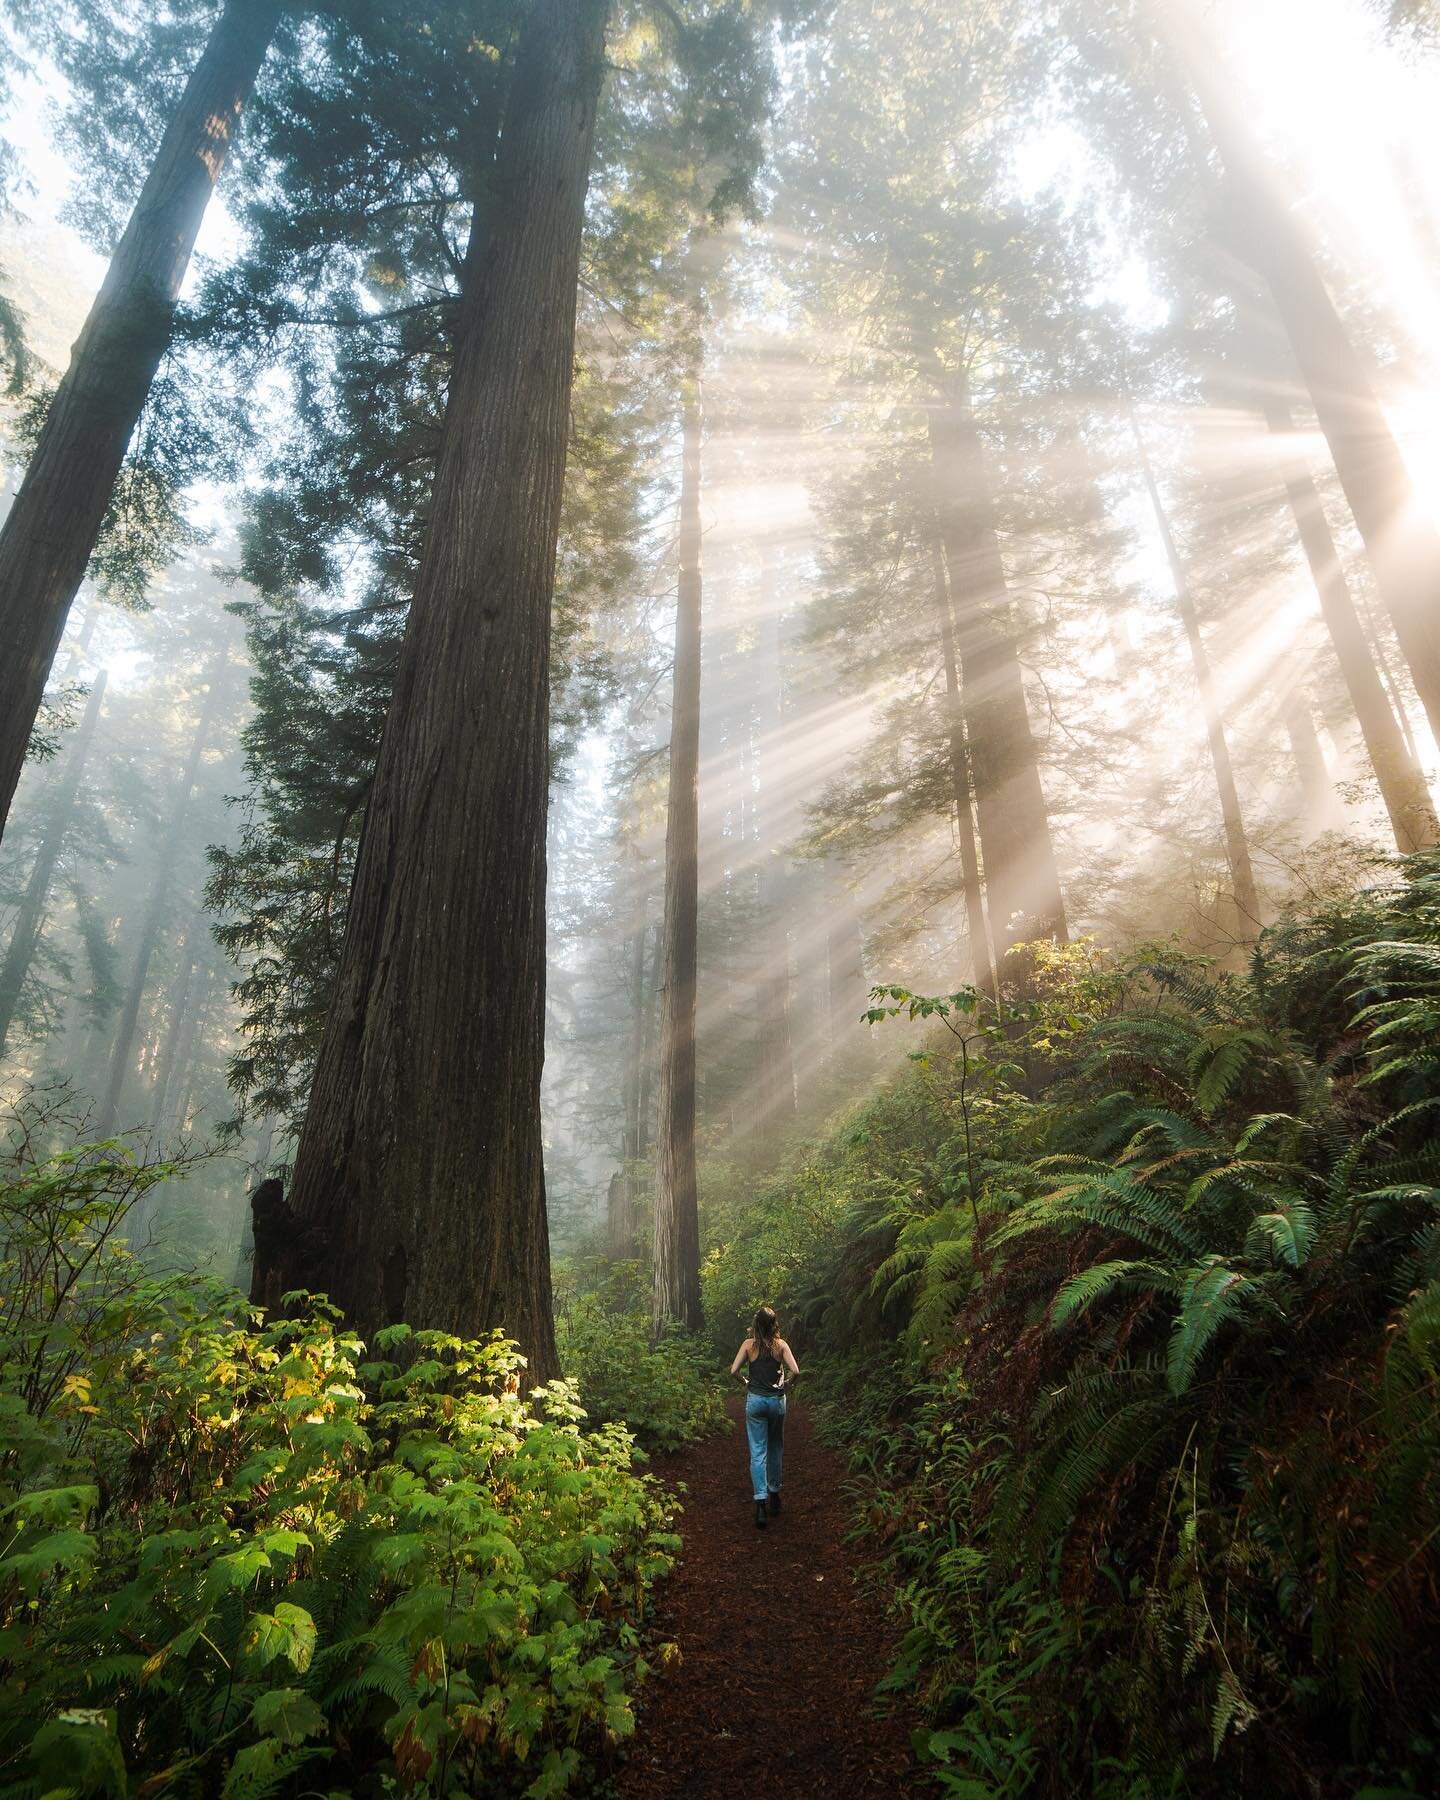 The redwood forests of Northern California, just as stunning as they are ancient. 🌲 

We got particularly lucky this morning while driving down the coast. The morning was cloudy and dull, but as we pulled off the freeway onto the scenic parkway, the